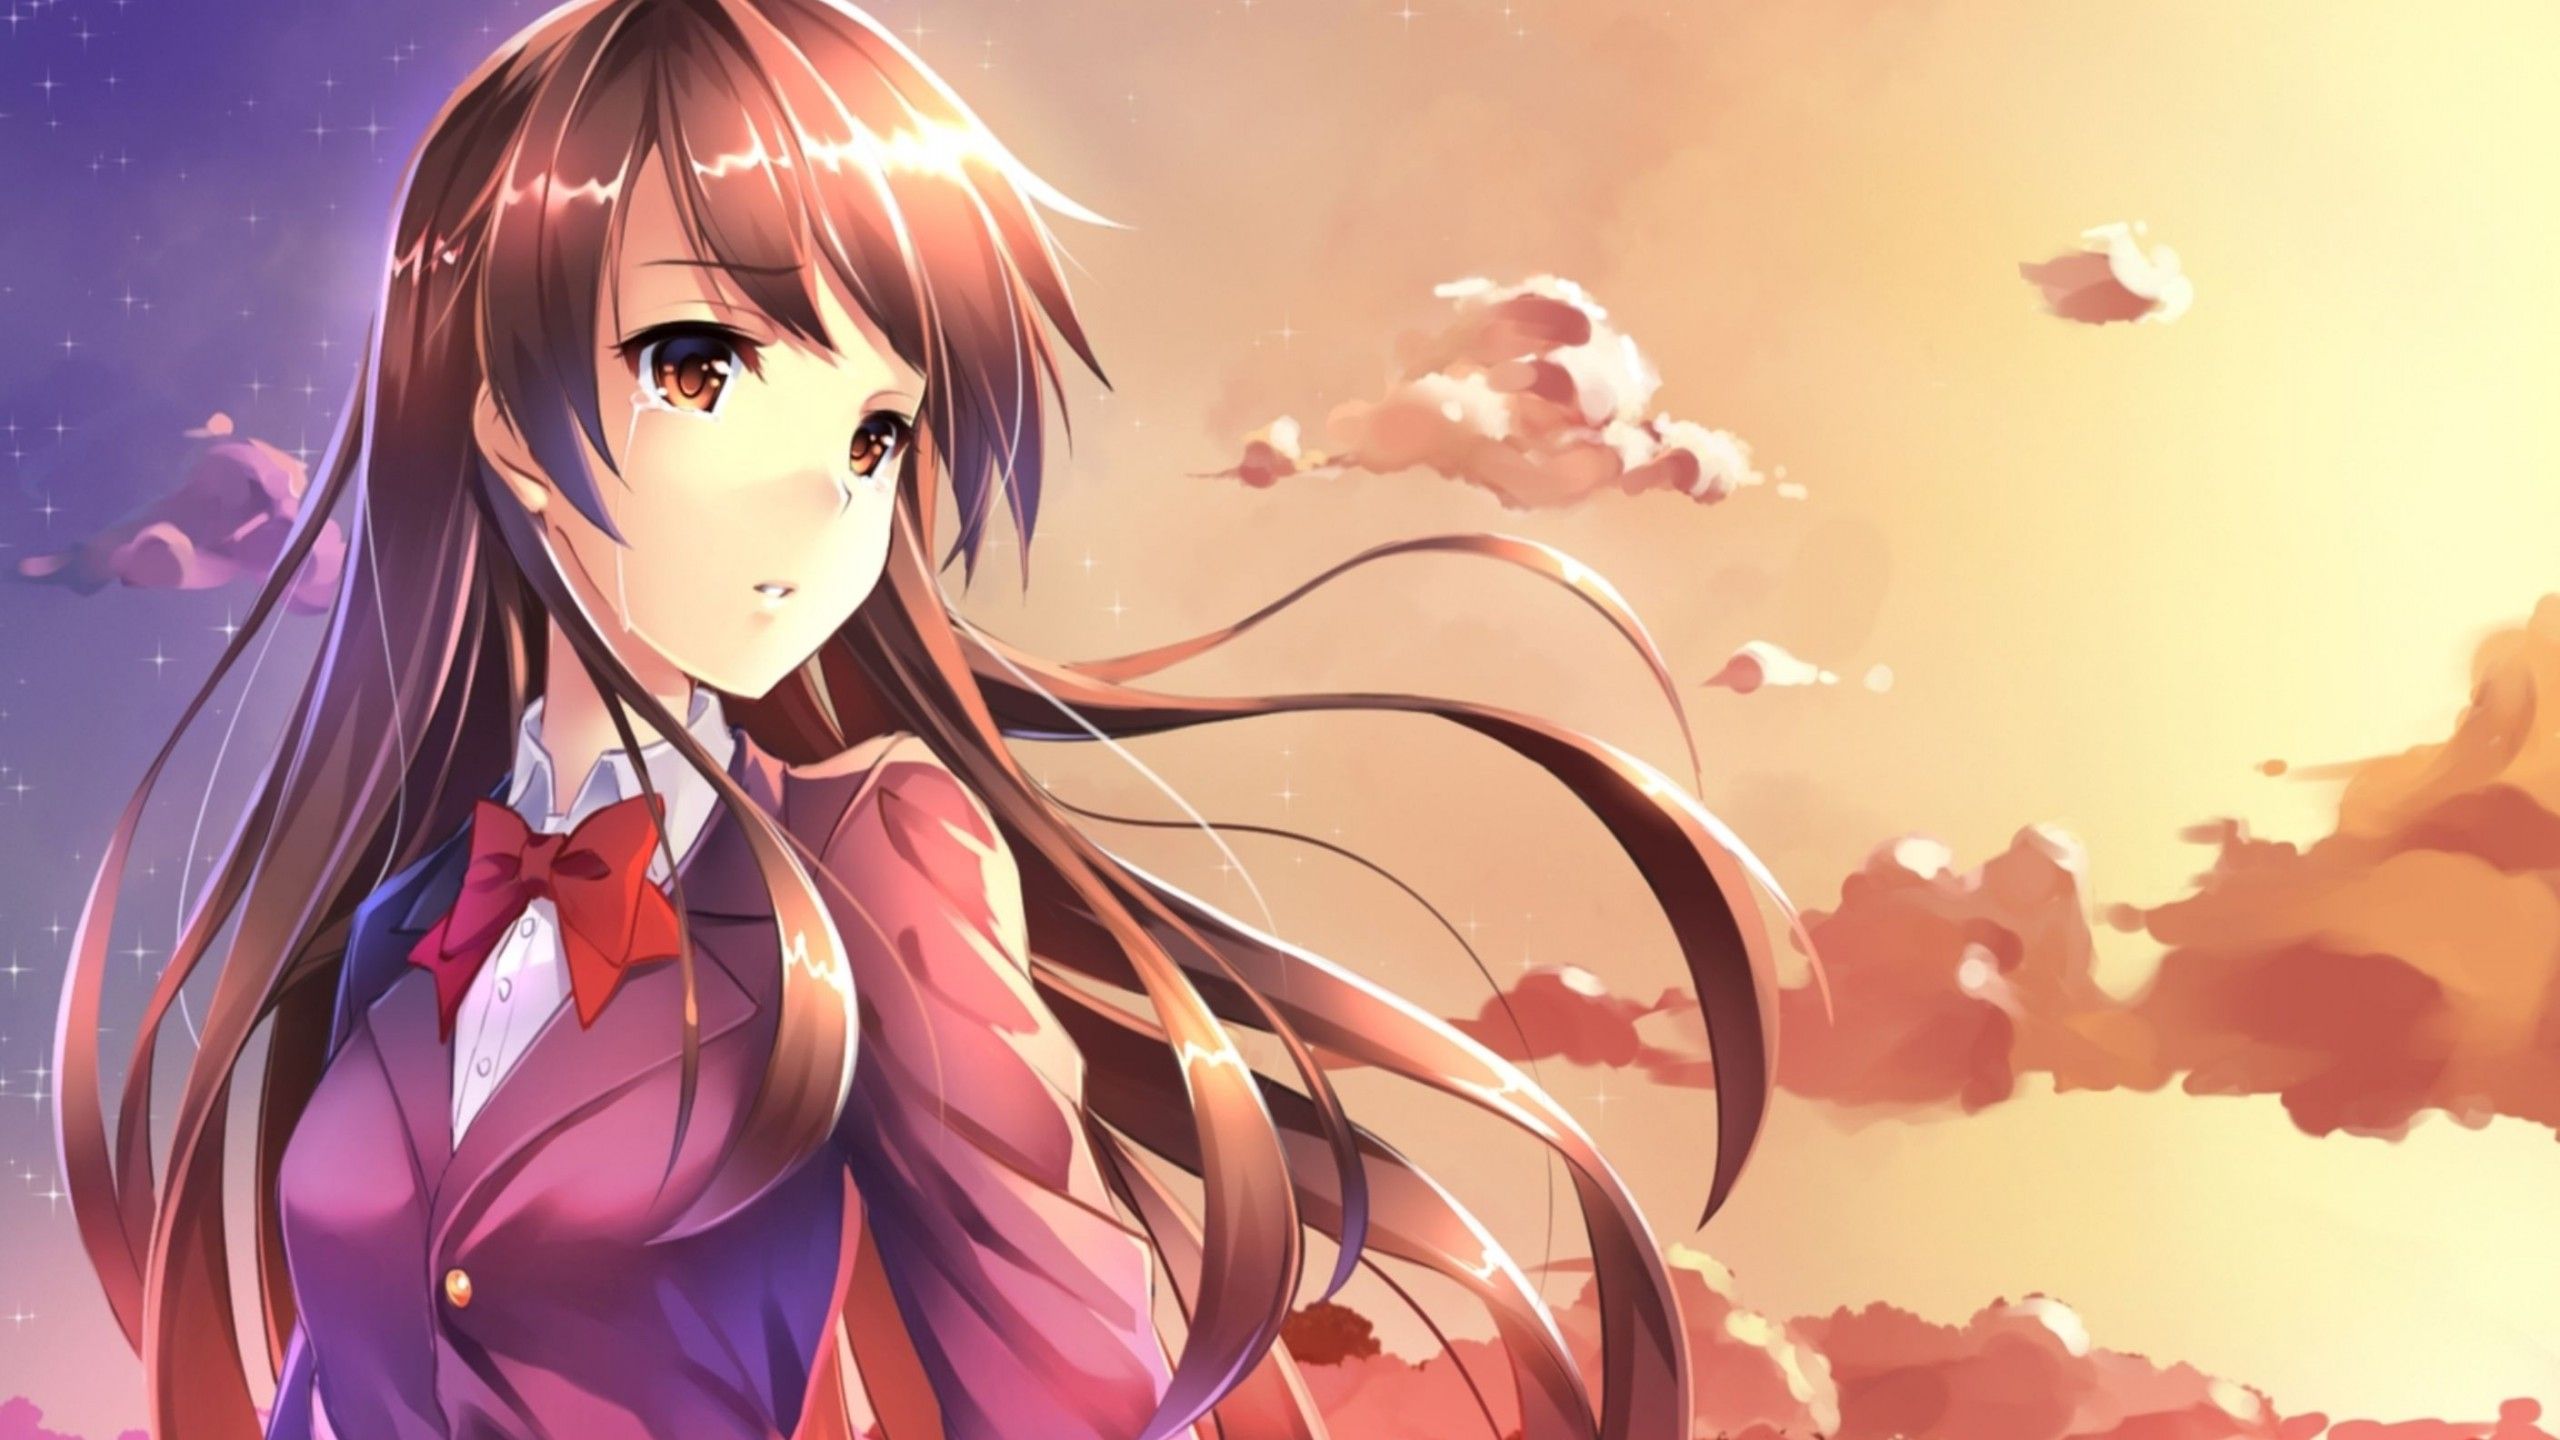 Sunset Tears Red Bow Crying Anime Girl .dailyhdwallpaper.com